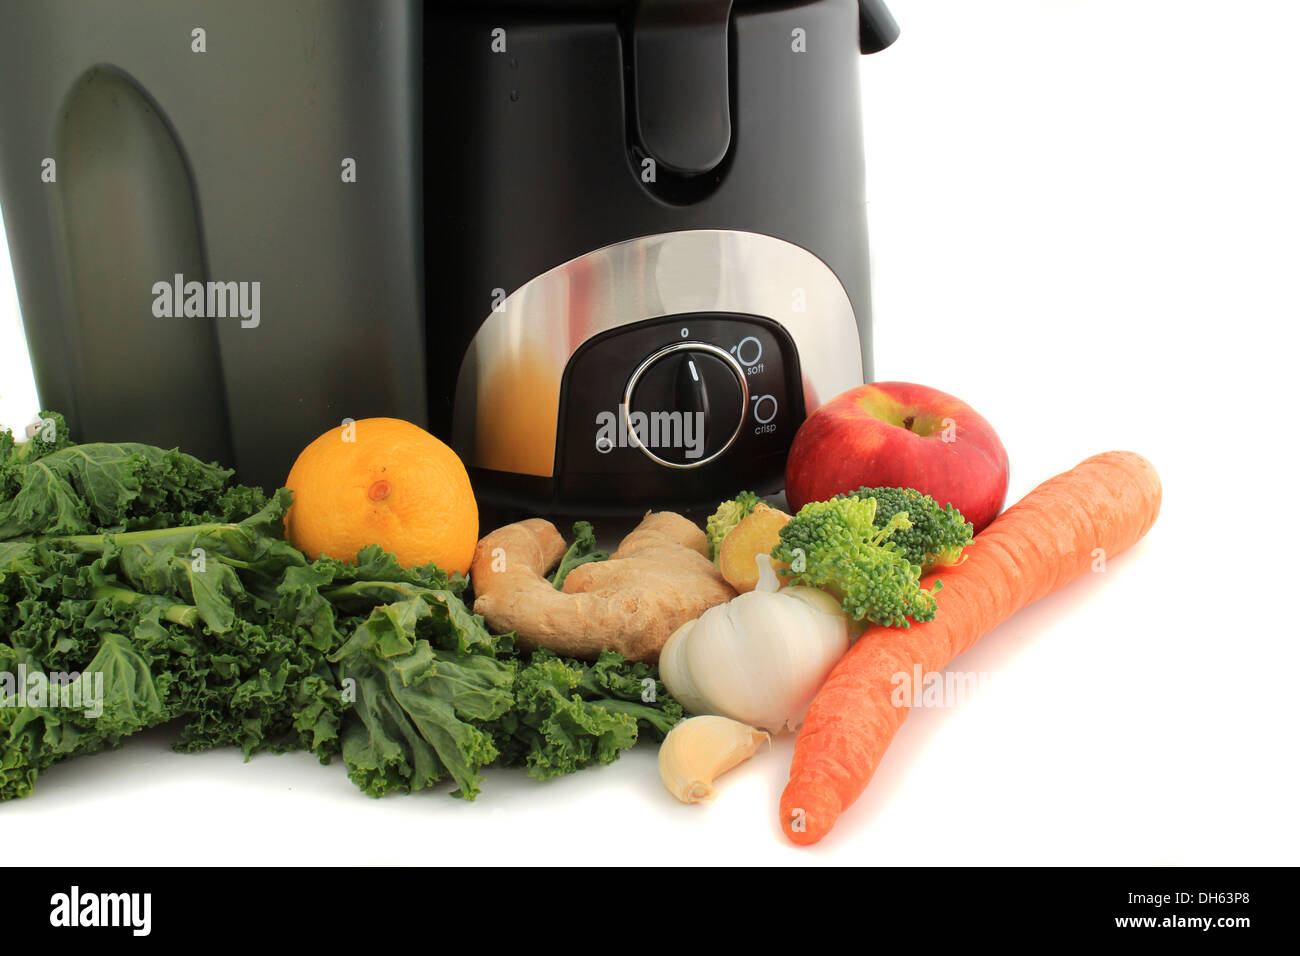 Juicer surrounded by healthy vegetables like carrots, ginger, and kale, ready to make juice Stock Photo